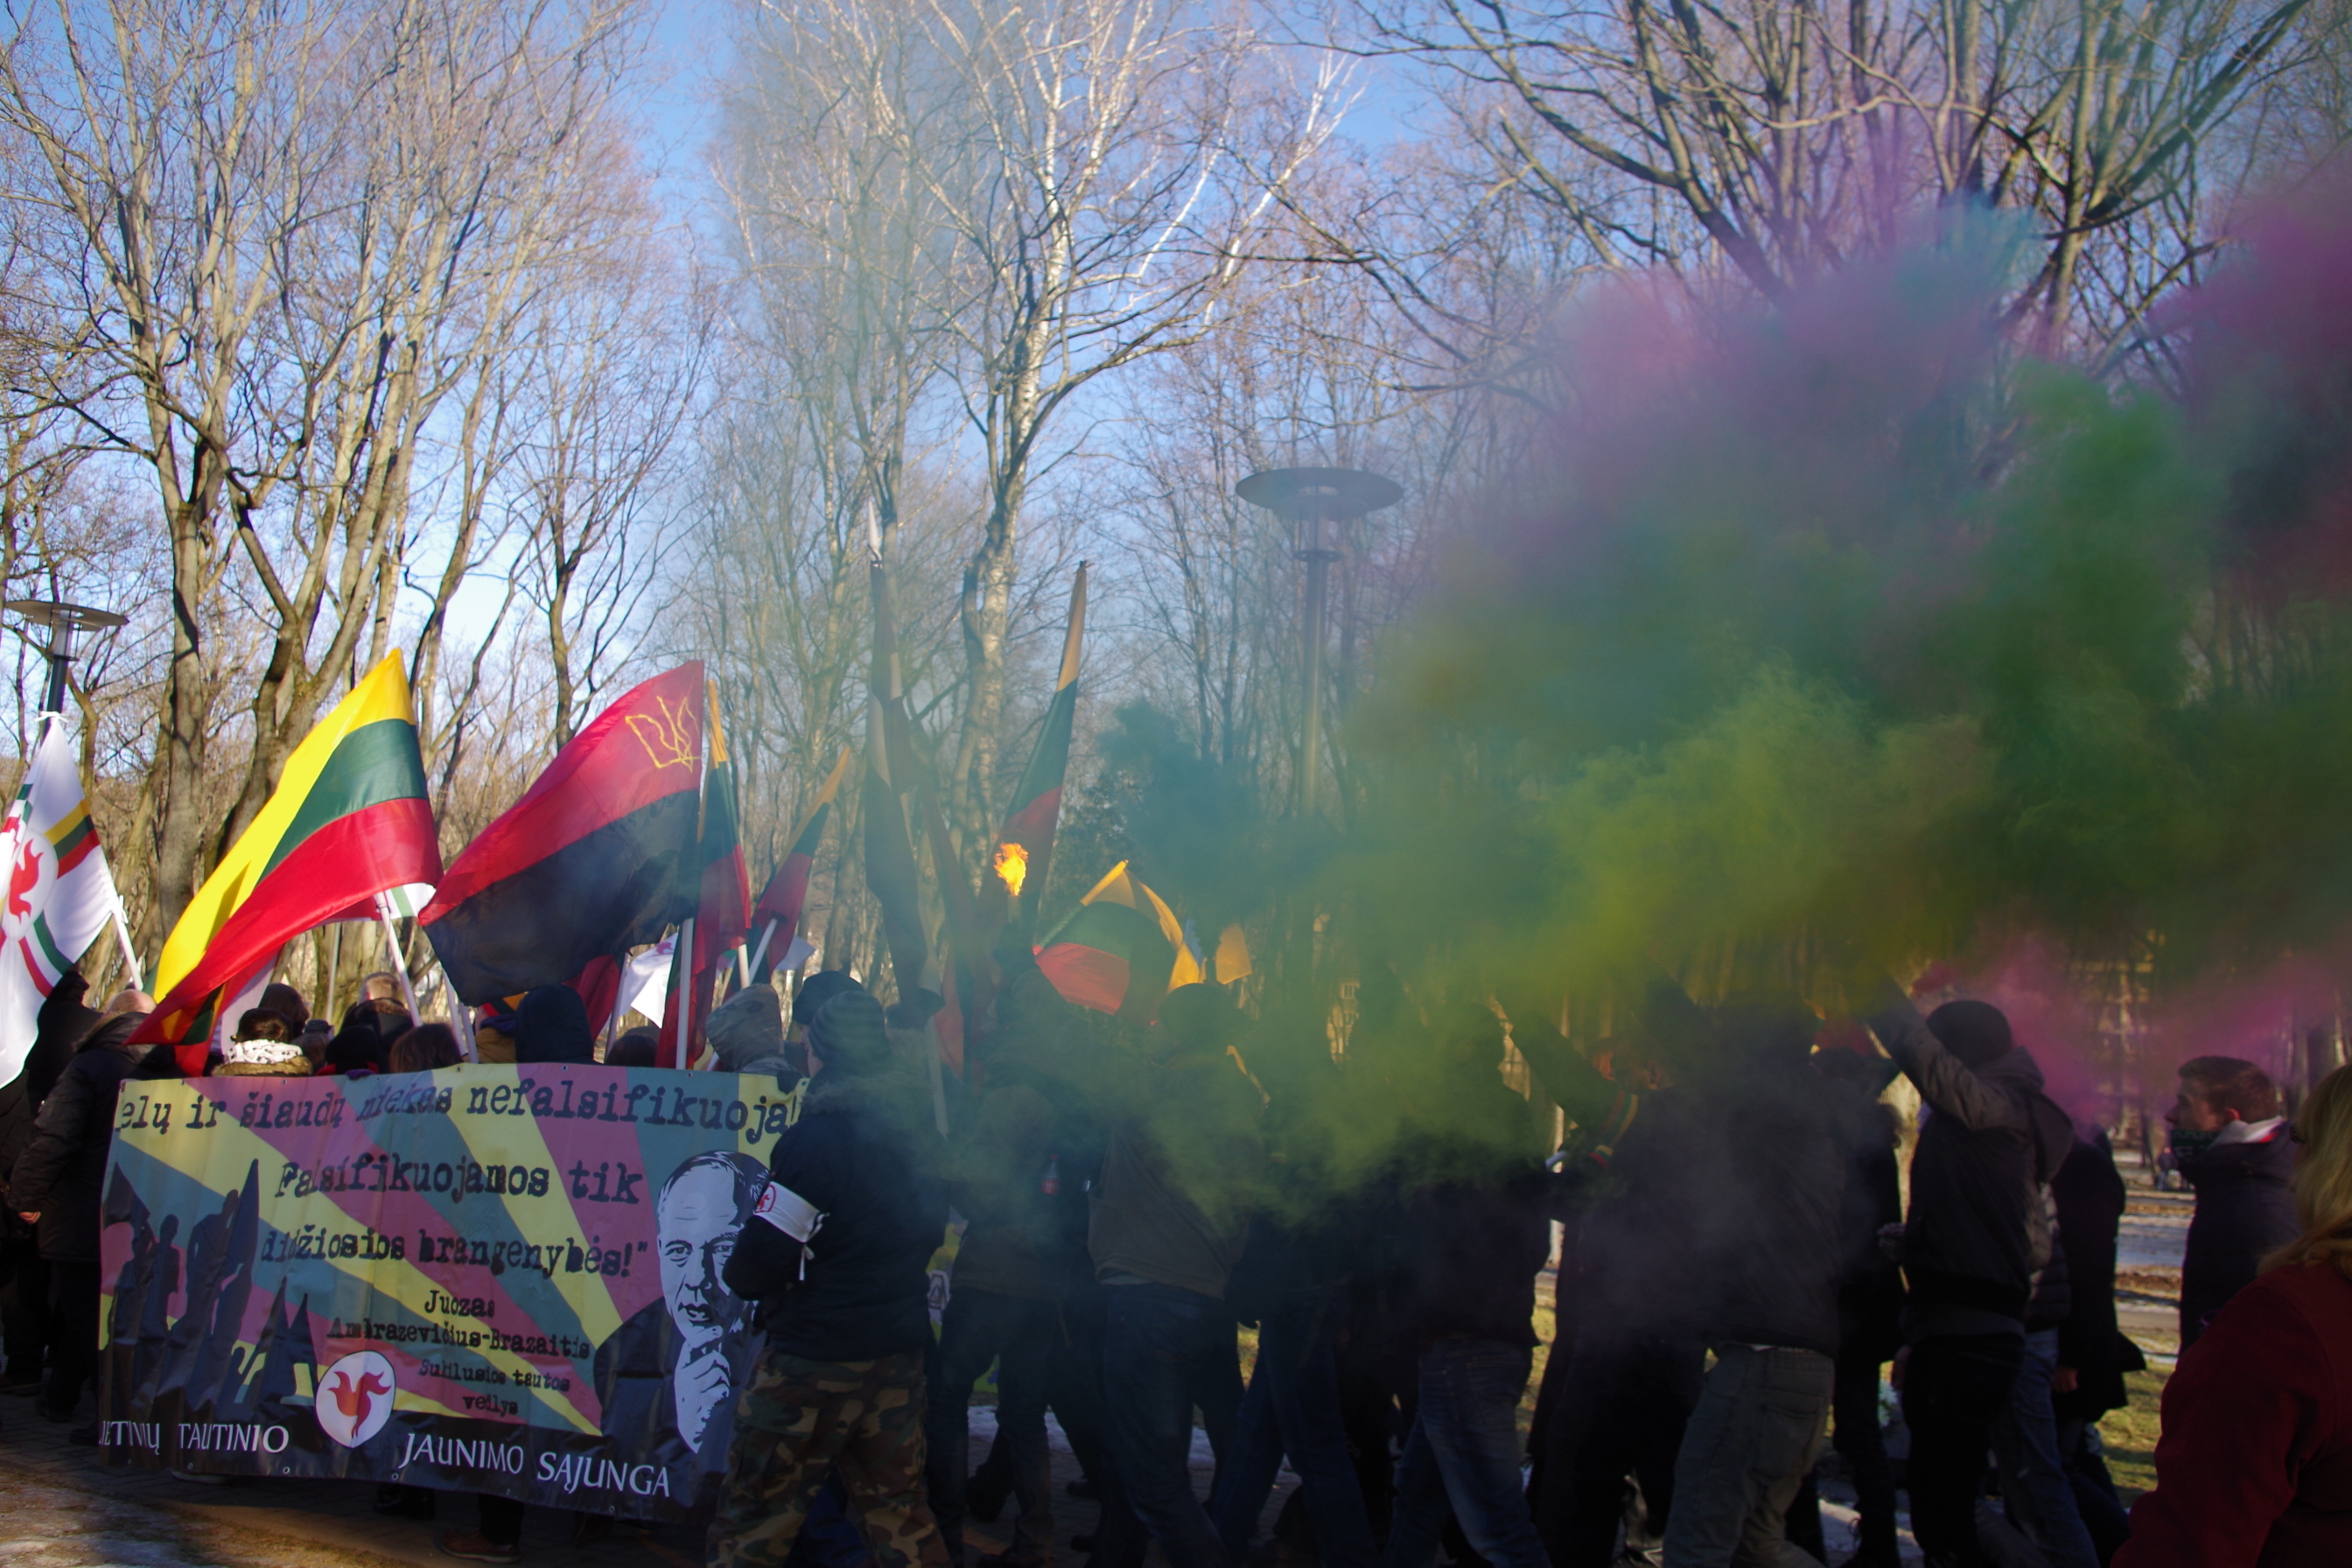 February 16 Lithuanian Independence Day Nationalist March in Kaunas Fails